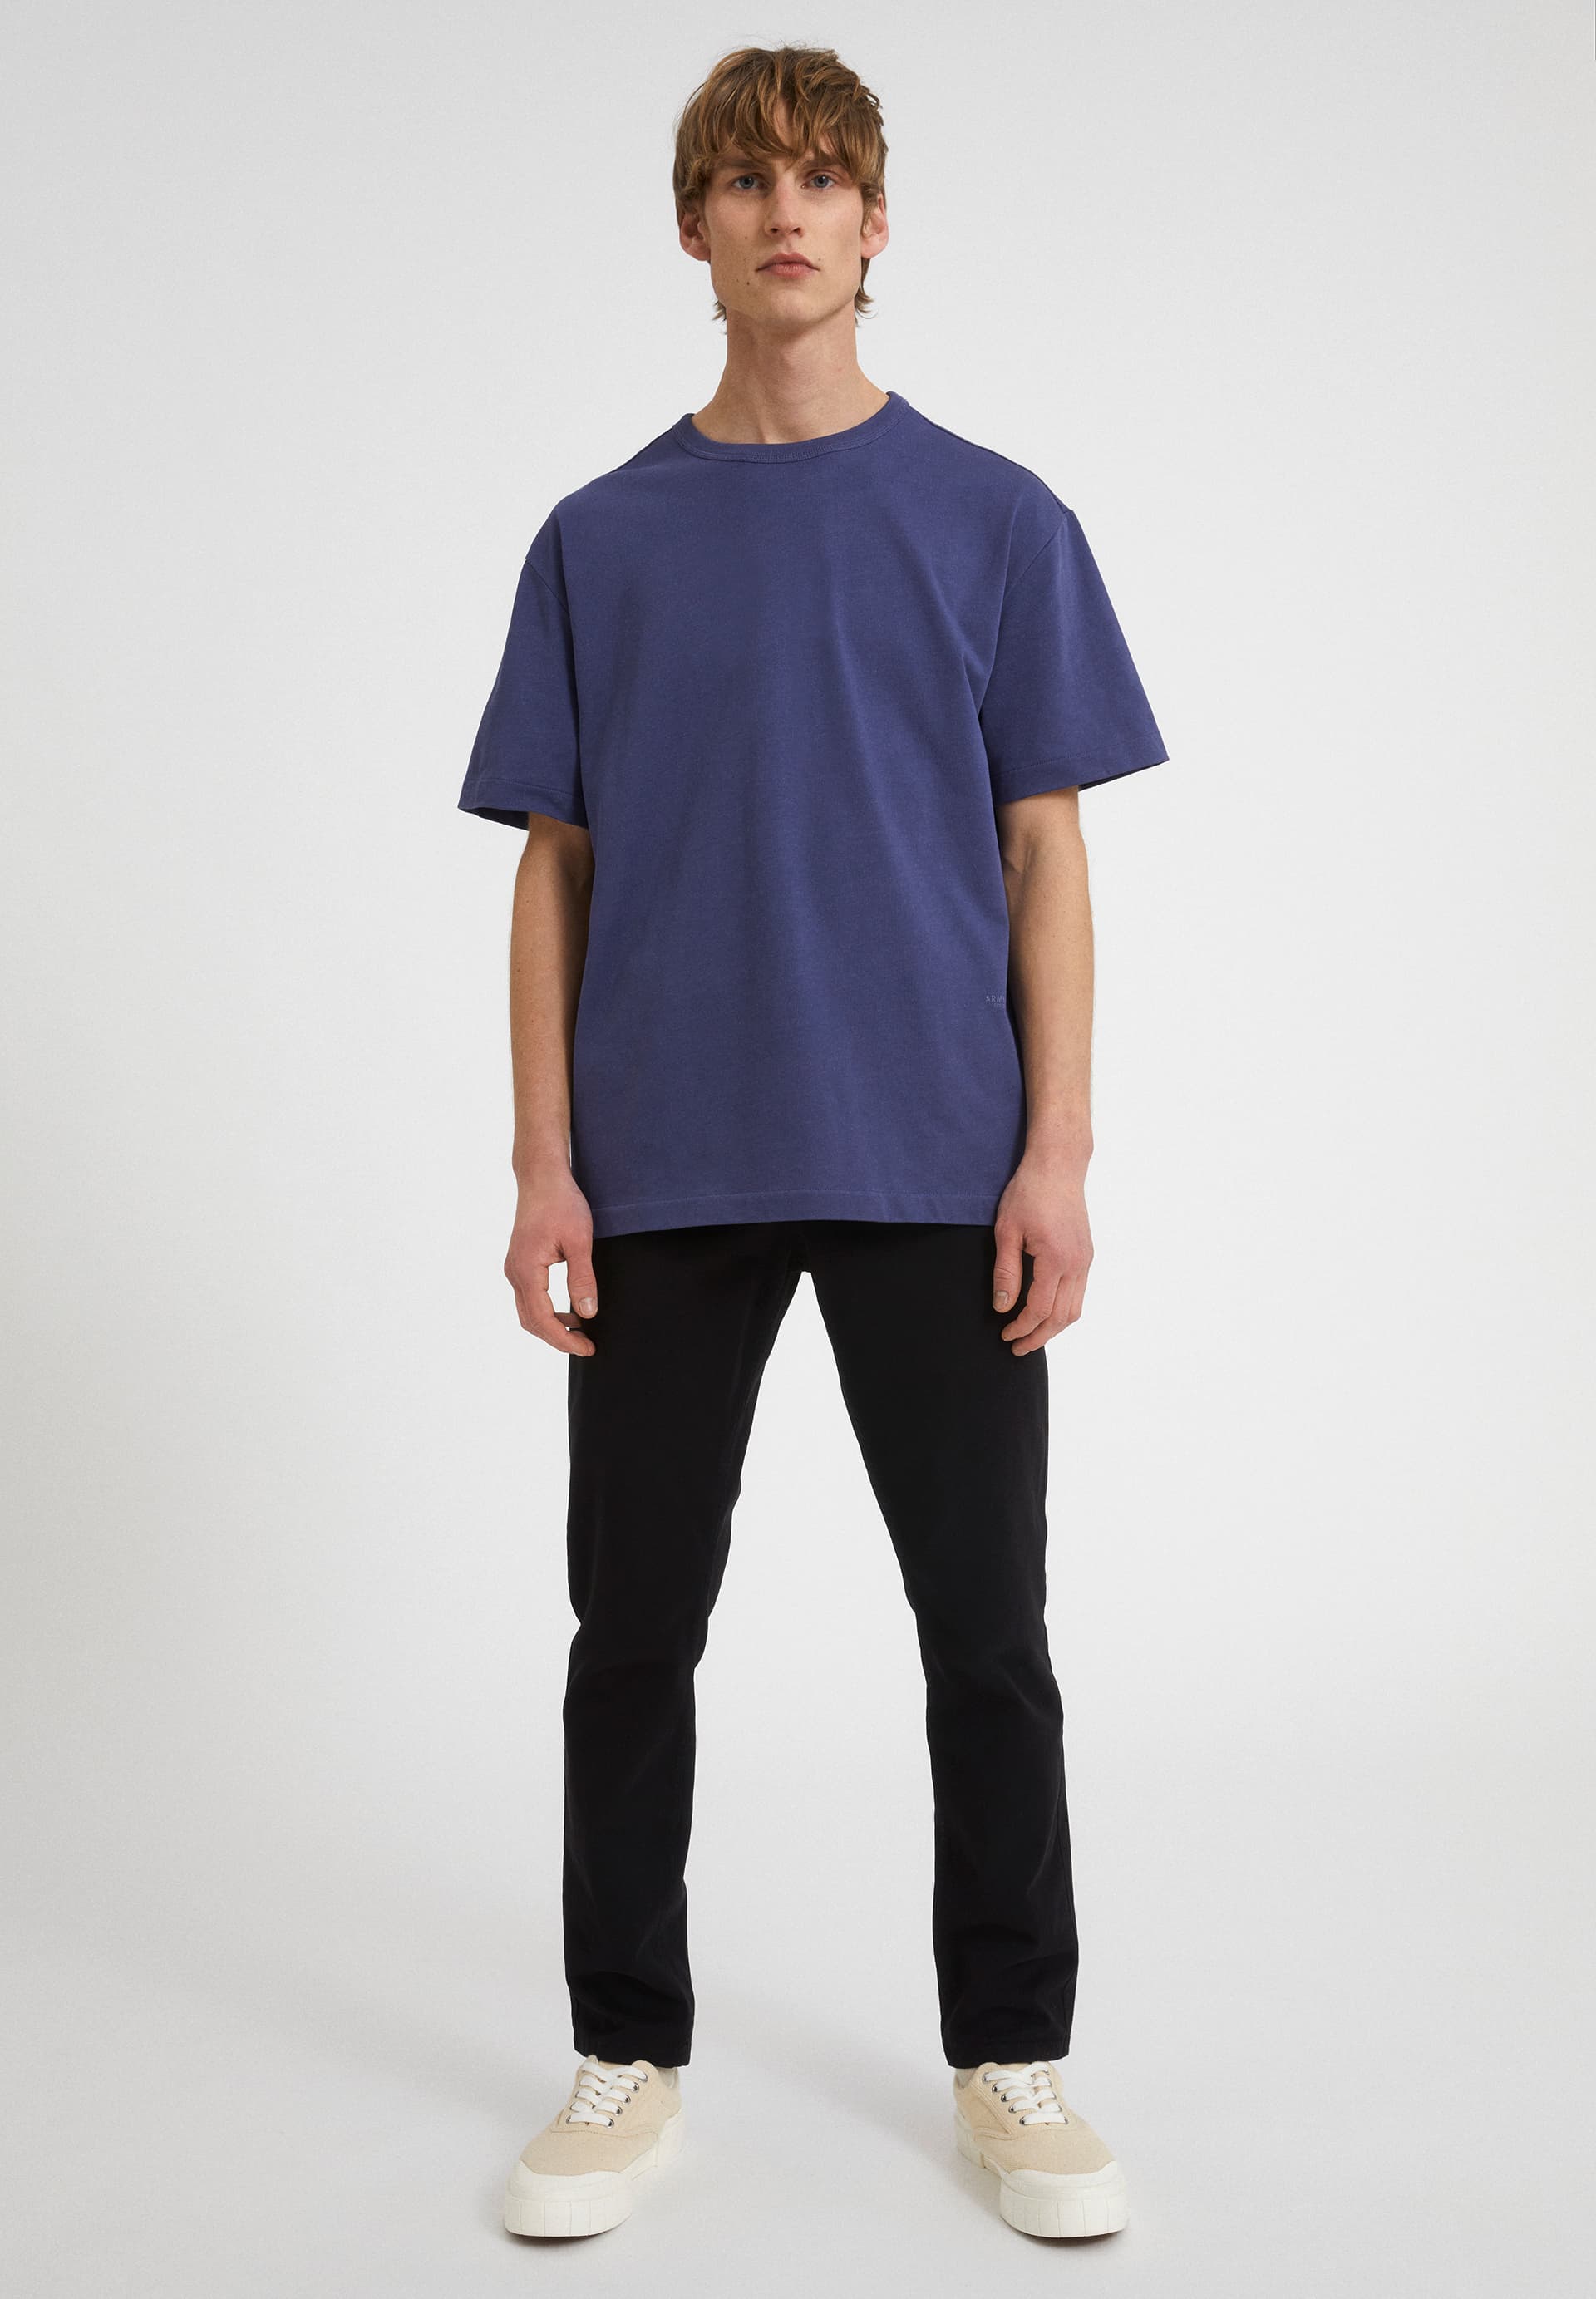 AALEX SOLID T-Shirt made of Organic Cotton